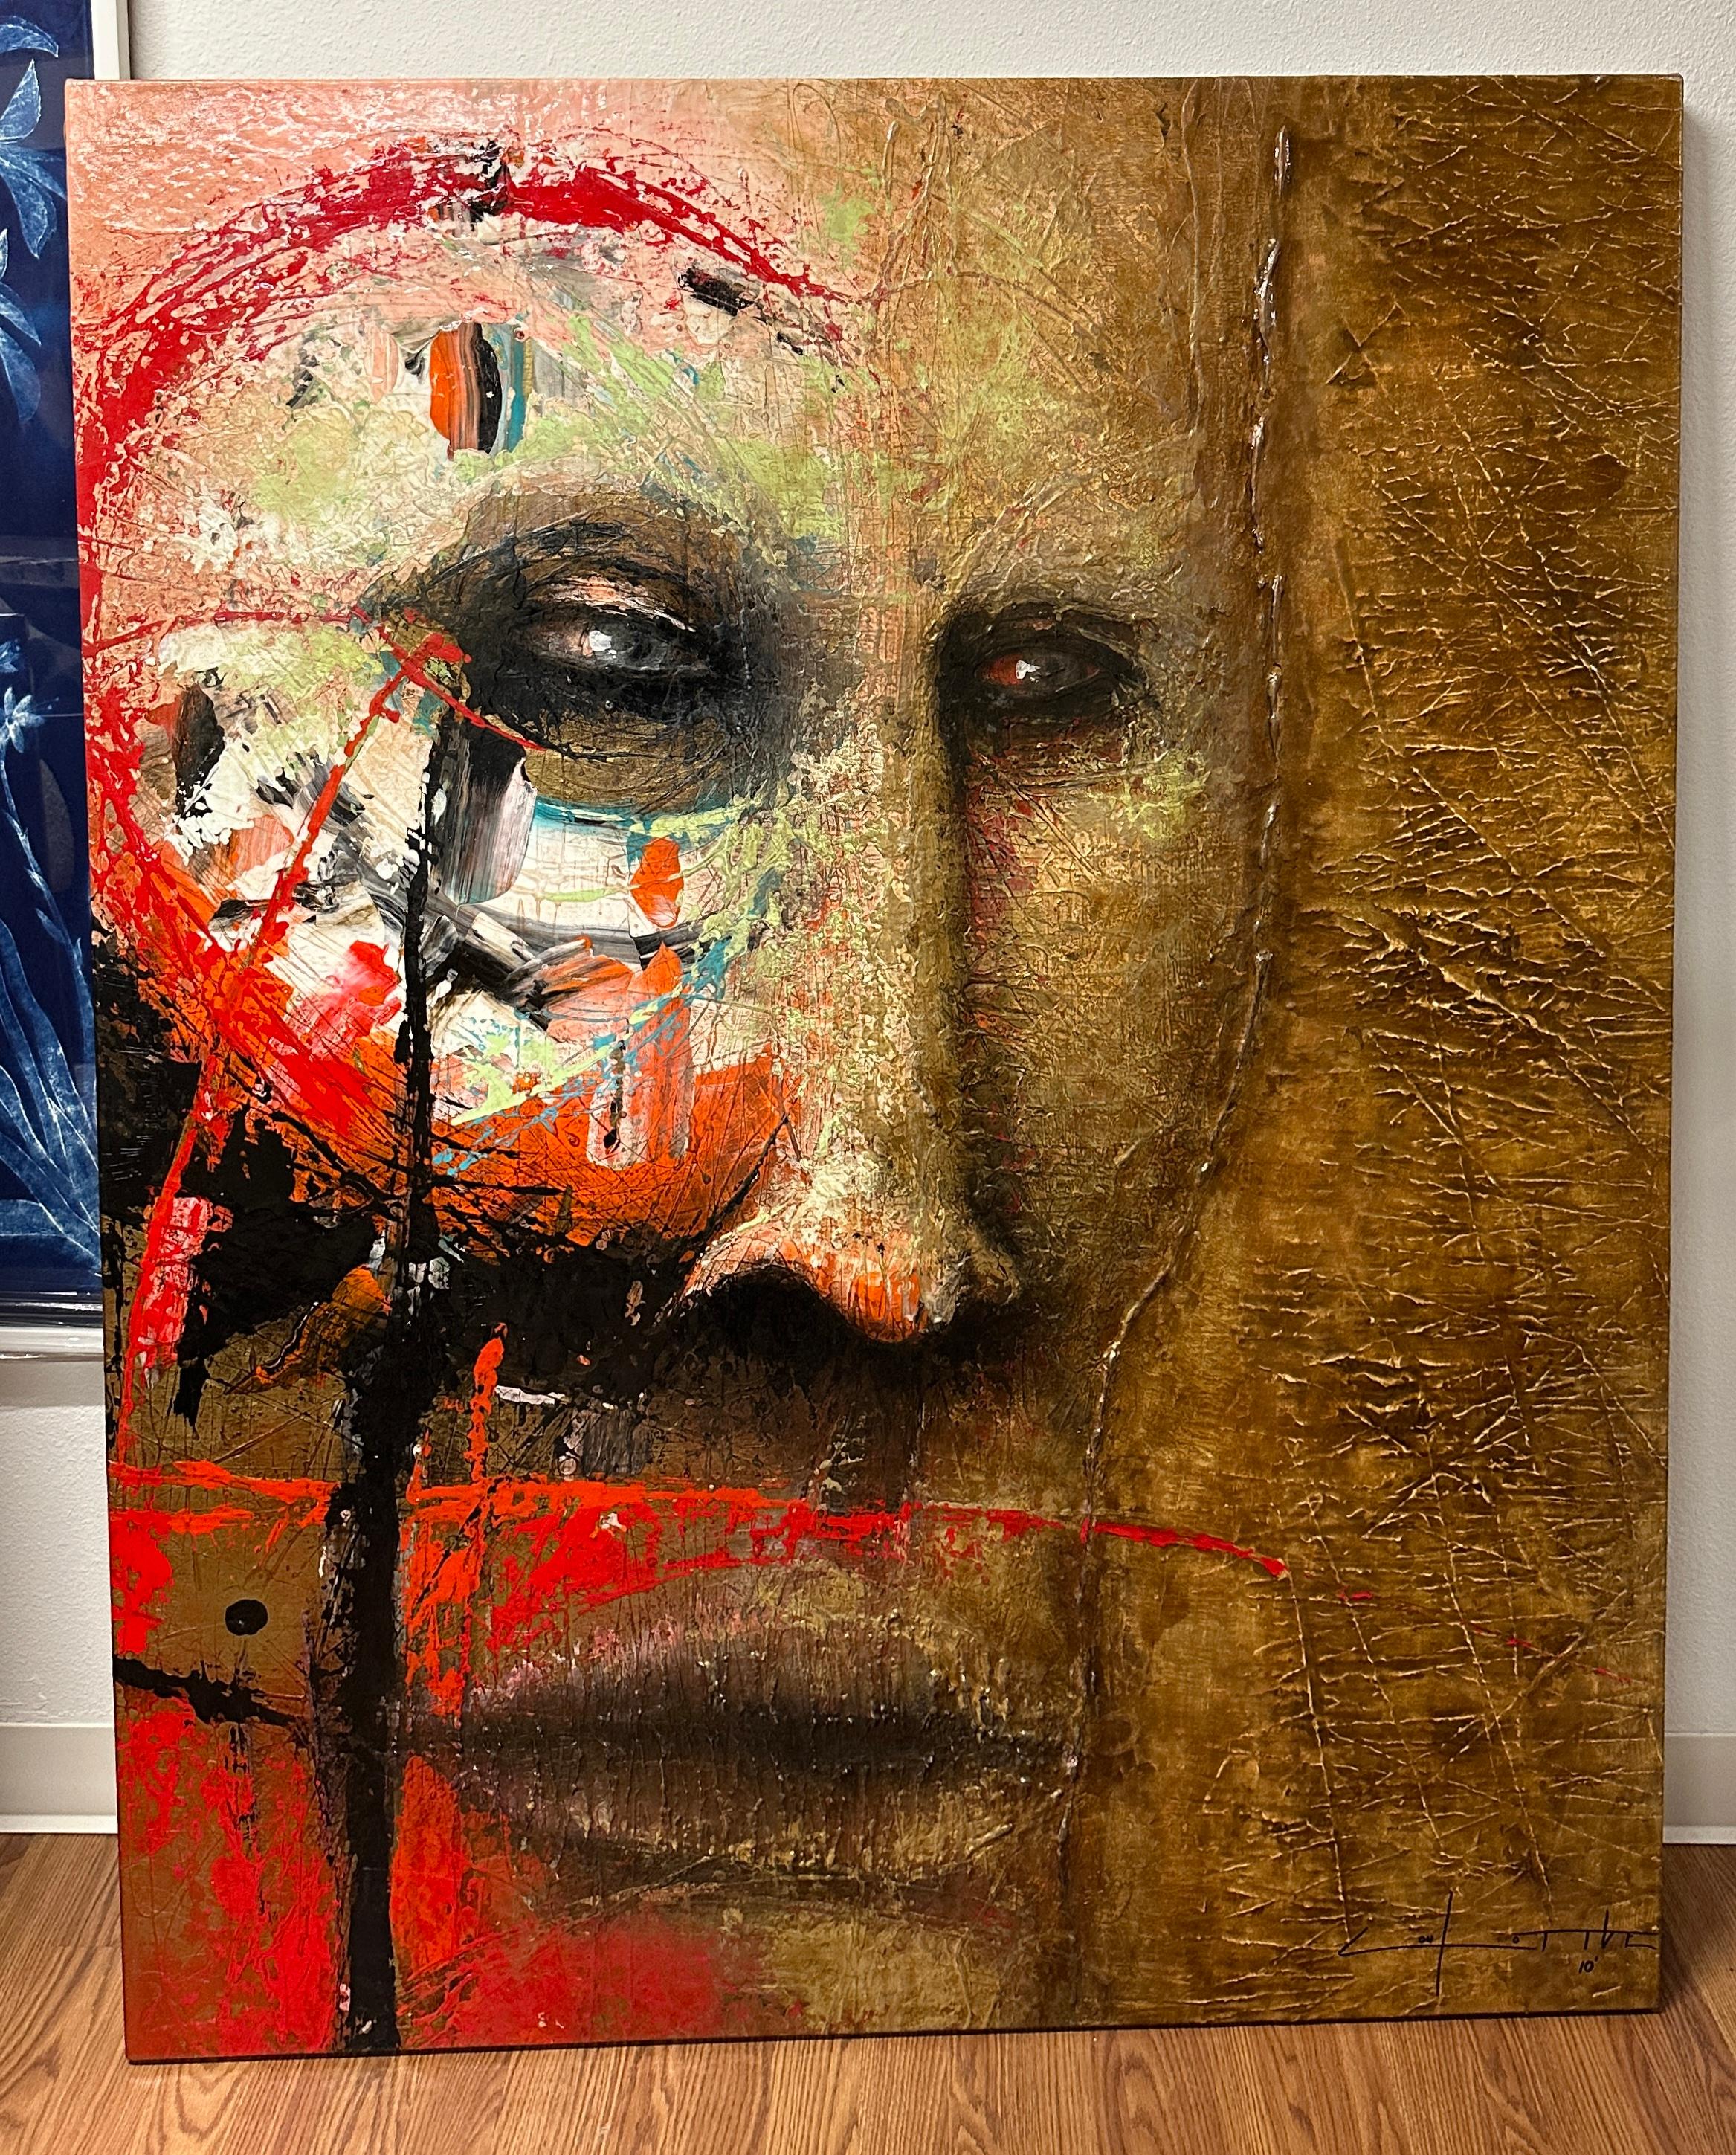 A striking painting by the noted Greek artist Margarita Lypridou. it is signed and dated lower right 2010. The painting was purchased in Montreal at the Blanche Gallery. The painting is in good condition, with only some minor losses.